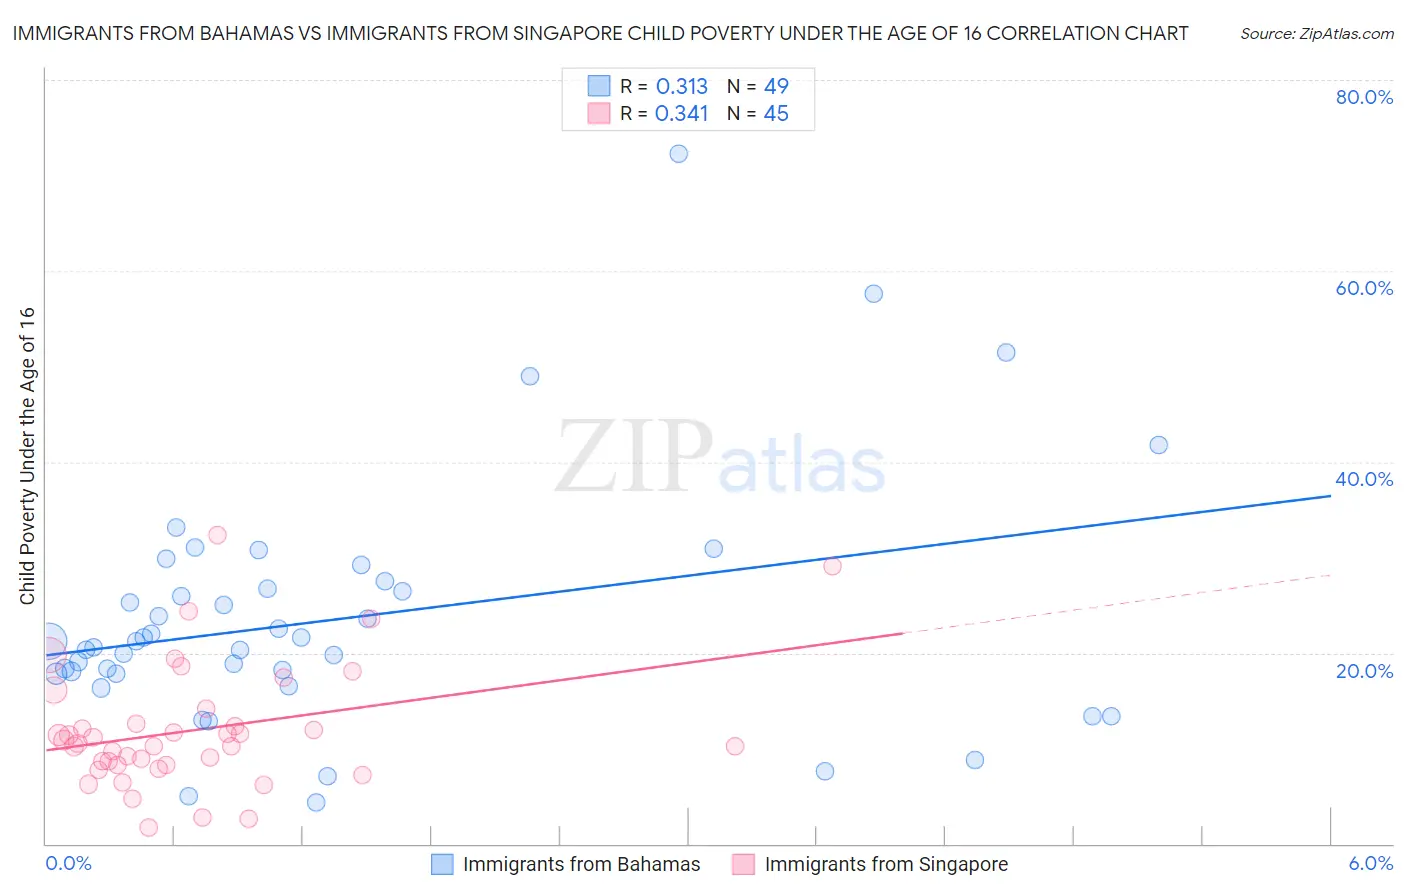 Immigrants from Bahamas vs Immigrants from Singapore Child Poverty Under the Age of 16